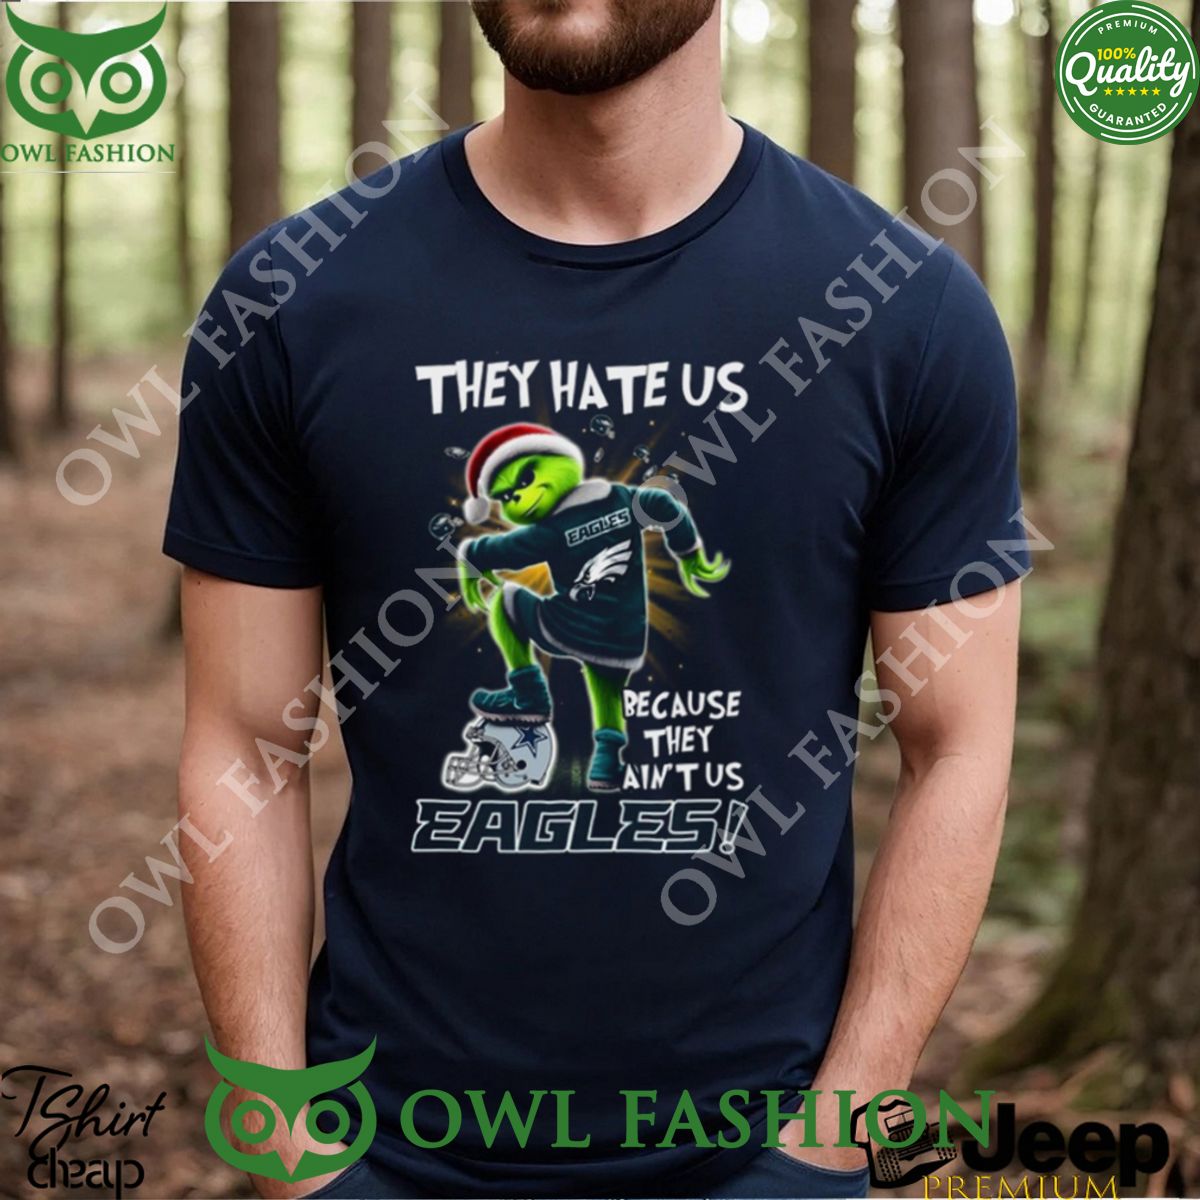 grinch they hate us because they aint us philadelphia eagles limited t shirt 1 85BYN.jpg